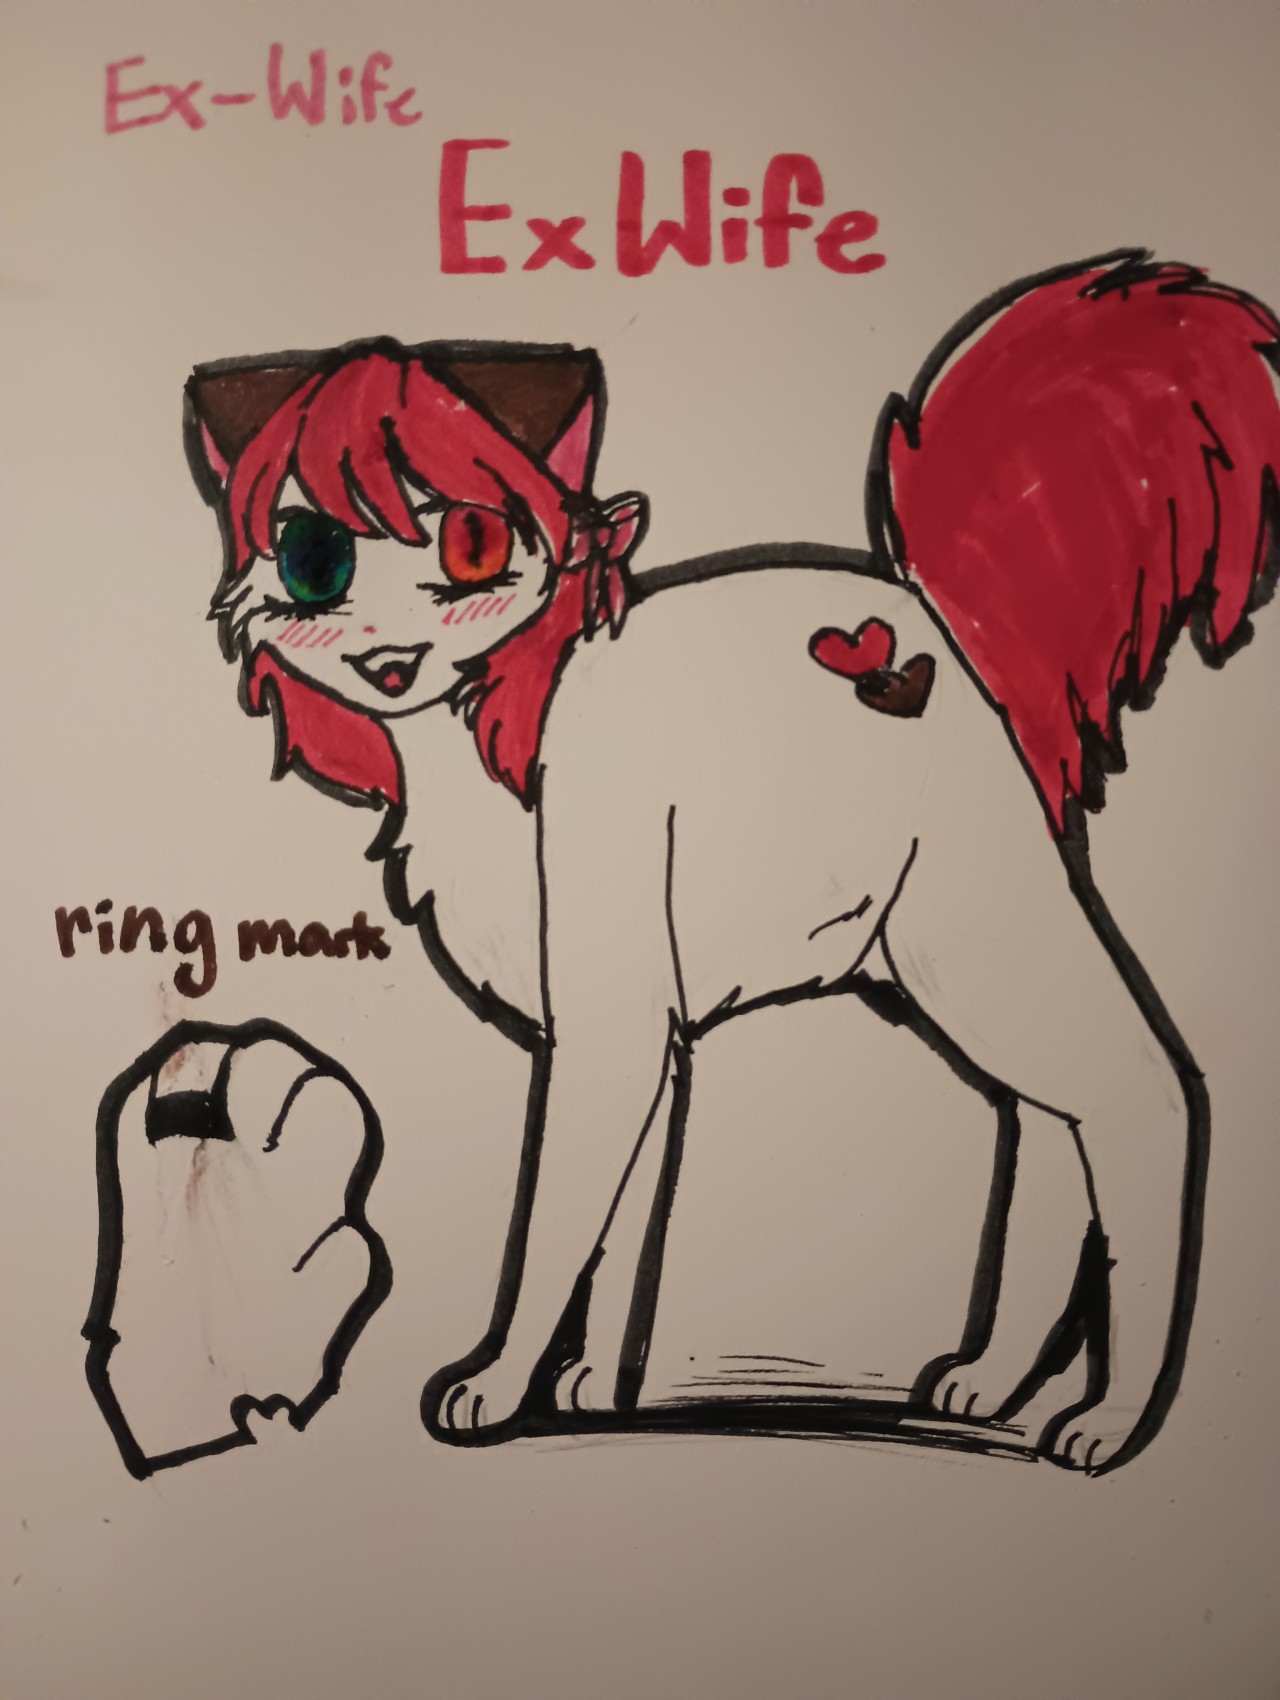 A marker drawing of a very shoujo inspired calico cat with heterochromia and short hair with a bow. She's named Ex-wife ExWife and there's a drawing of her left paw with a marking resembling a wedding ring titled ring mark.